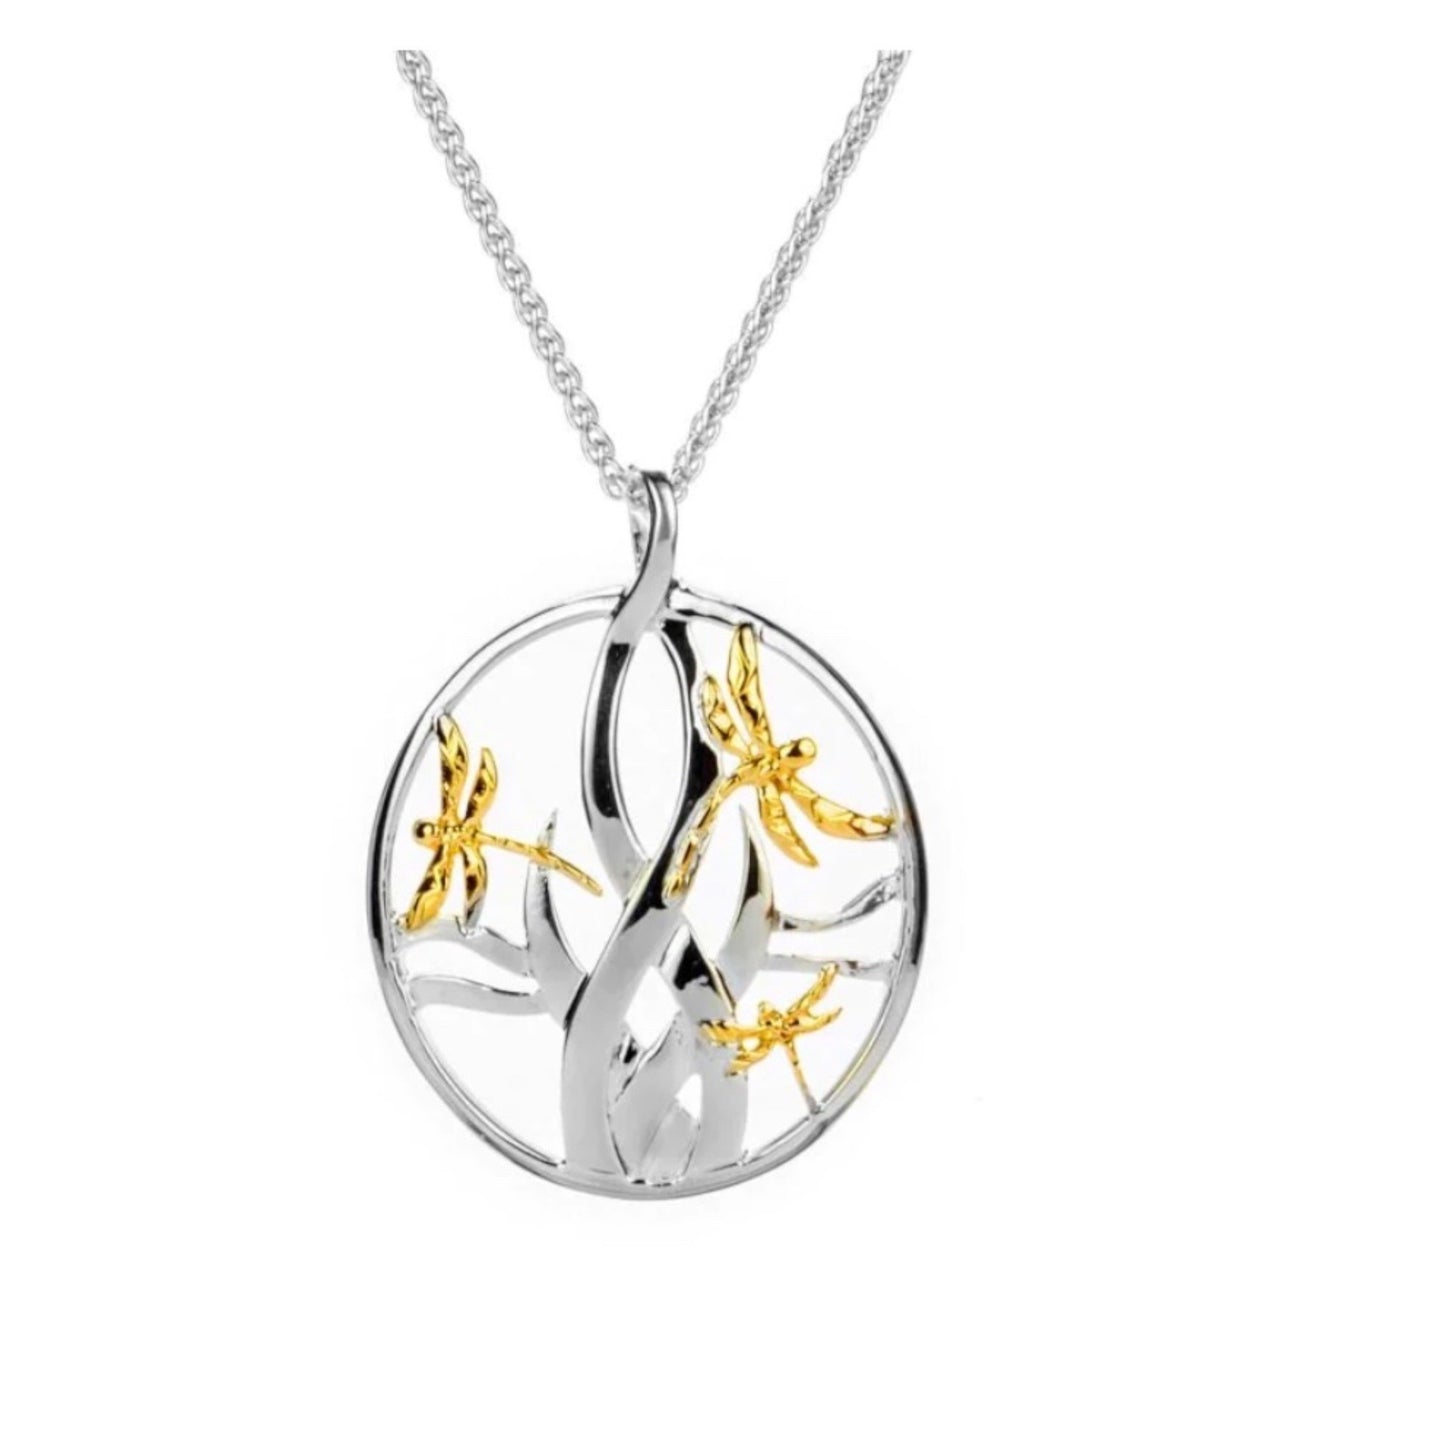 Keith Jack -Silver and 10K Gold Dragonfly in Reeds Small Pendant